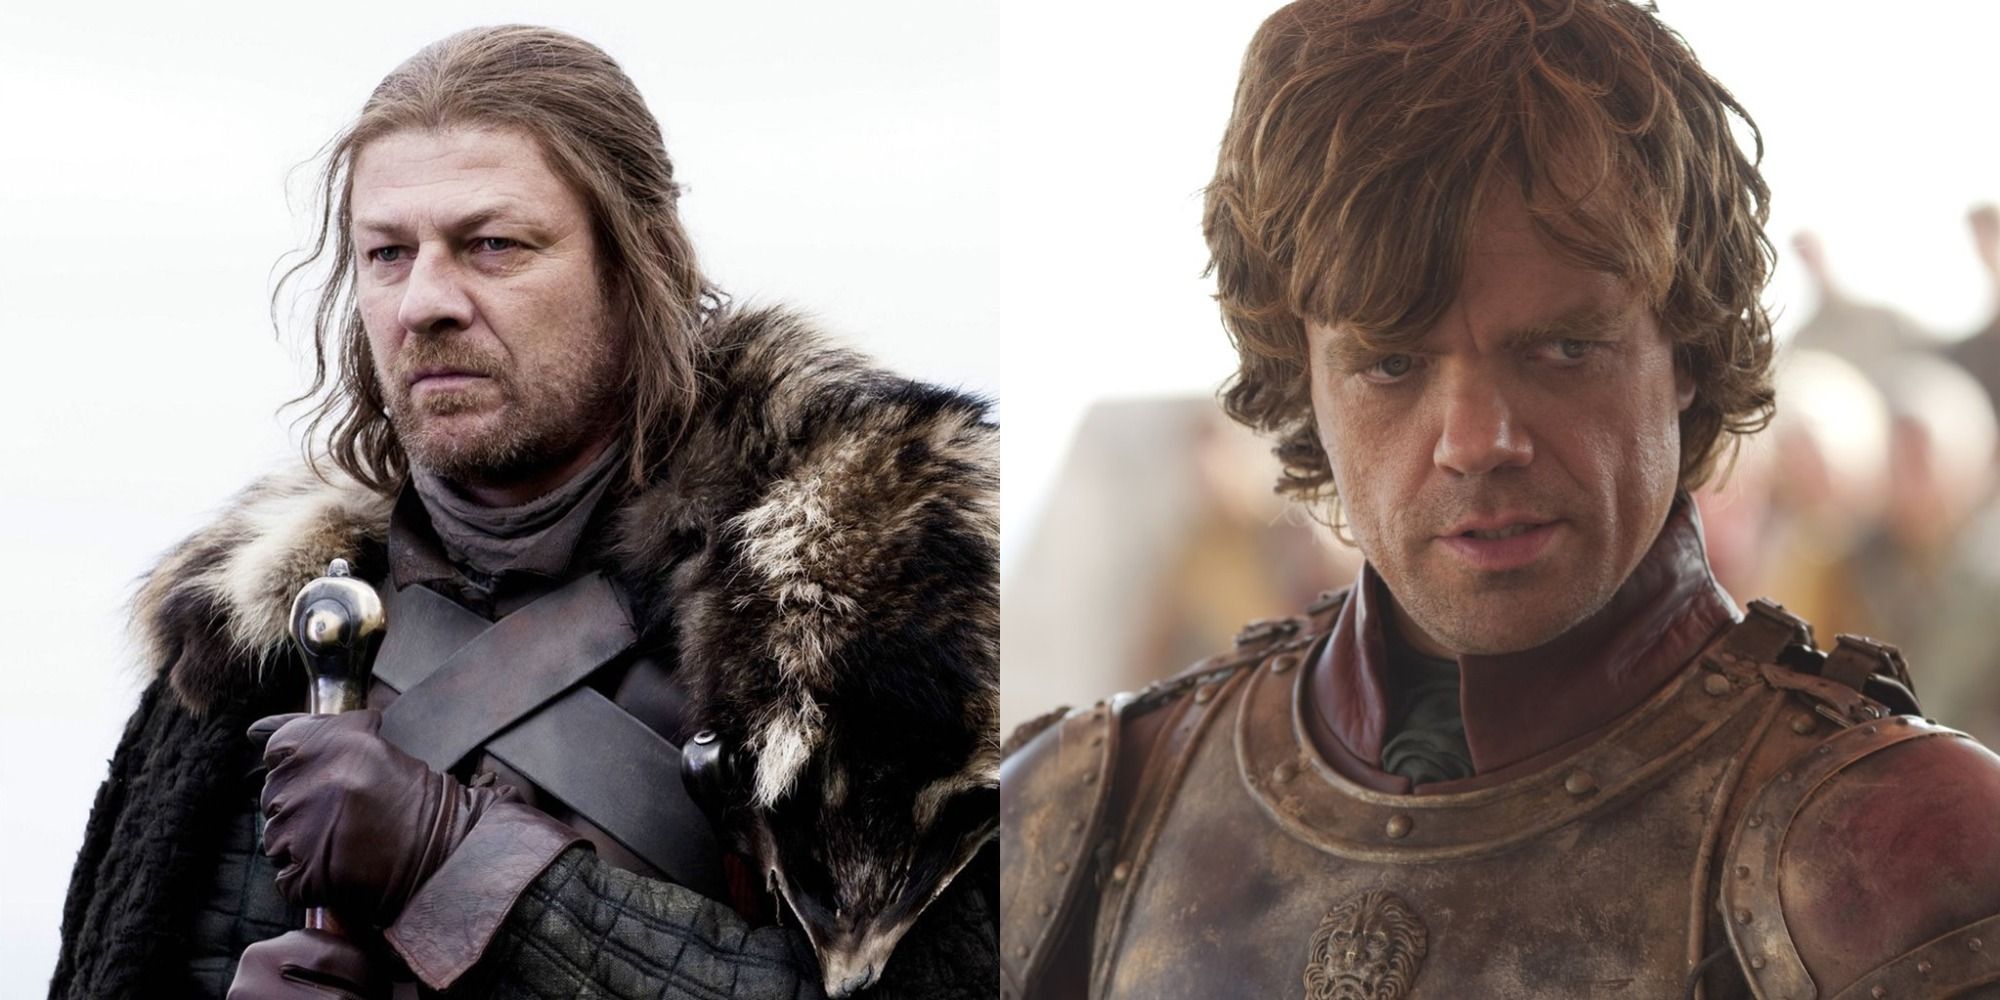 Split image of Sean Bean as Ned Stark and Peter Dinklage as Tyrion Lannister in Game of Thrones